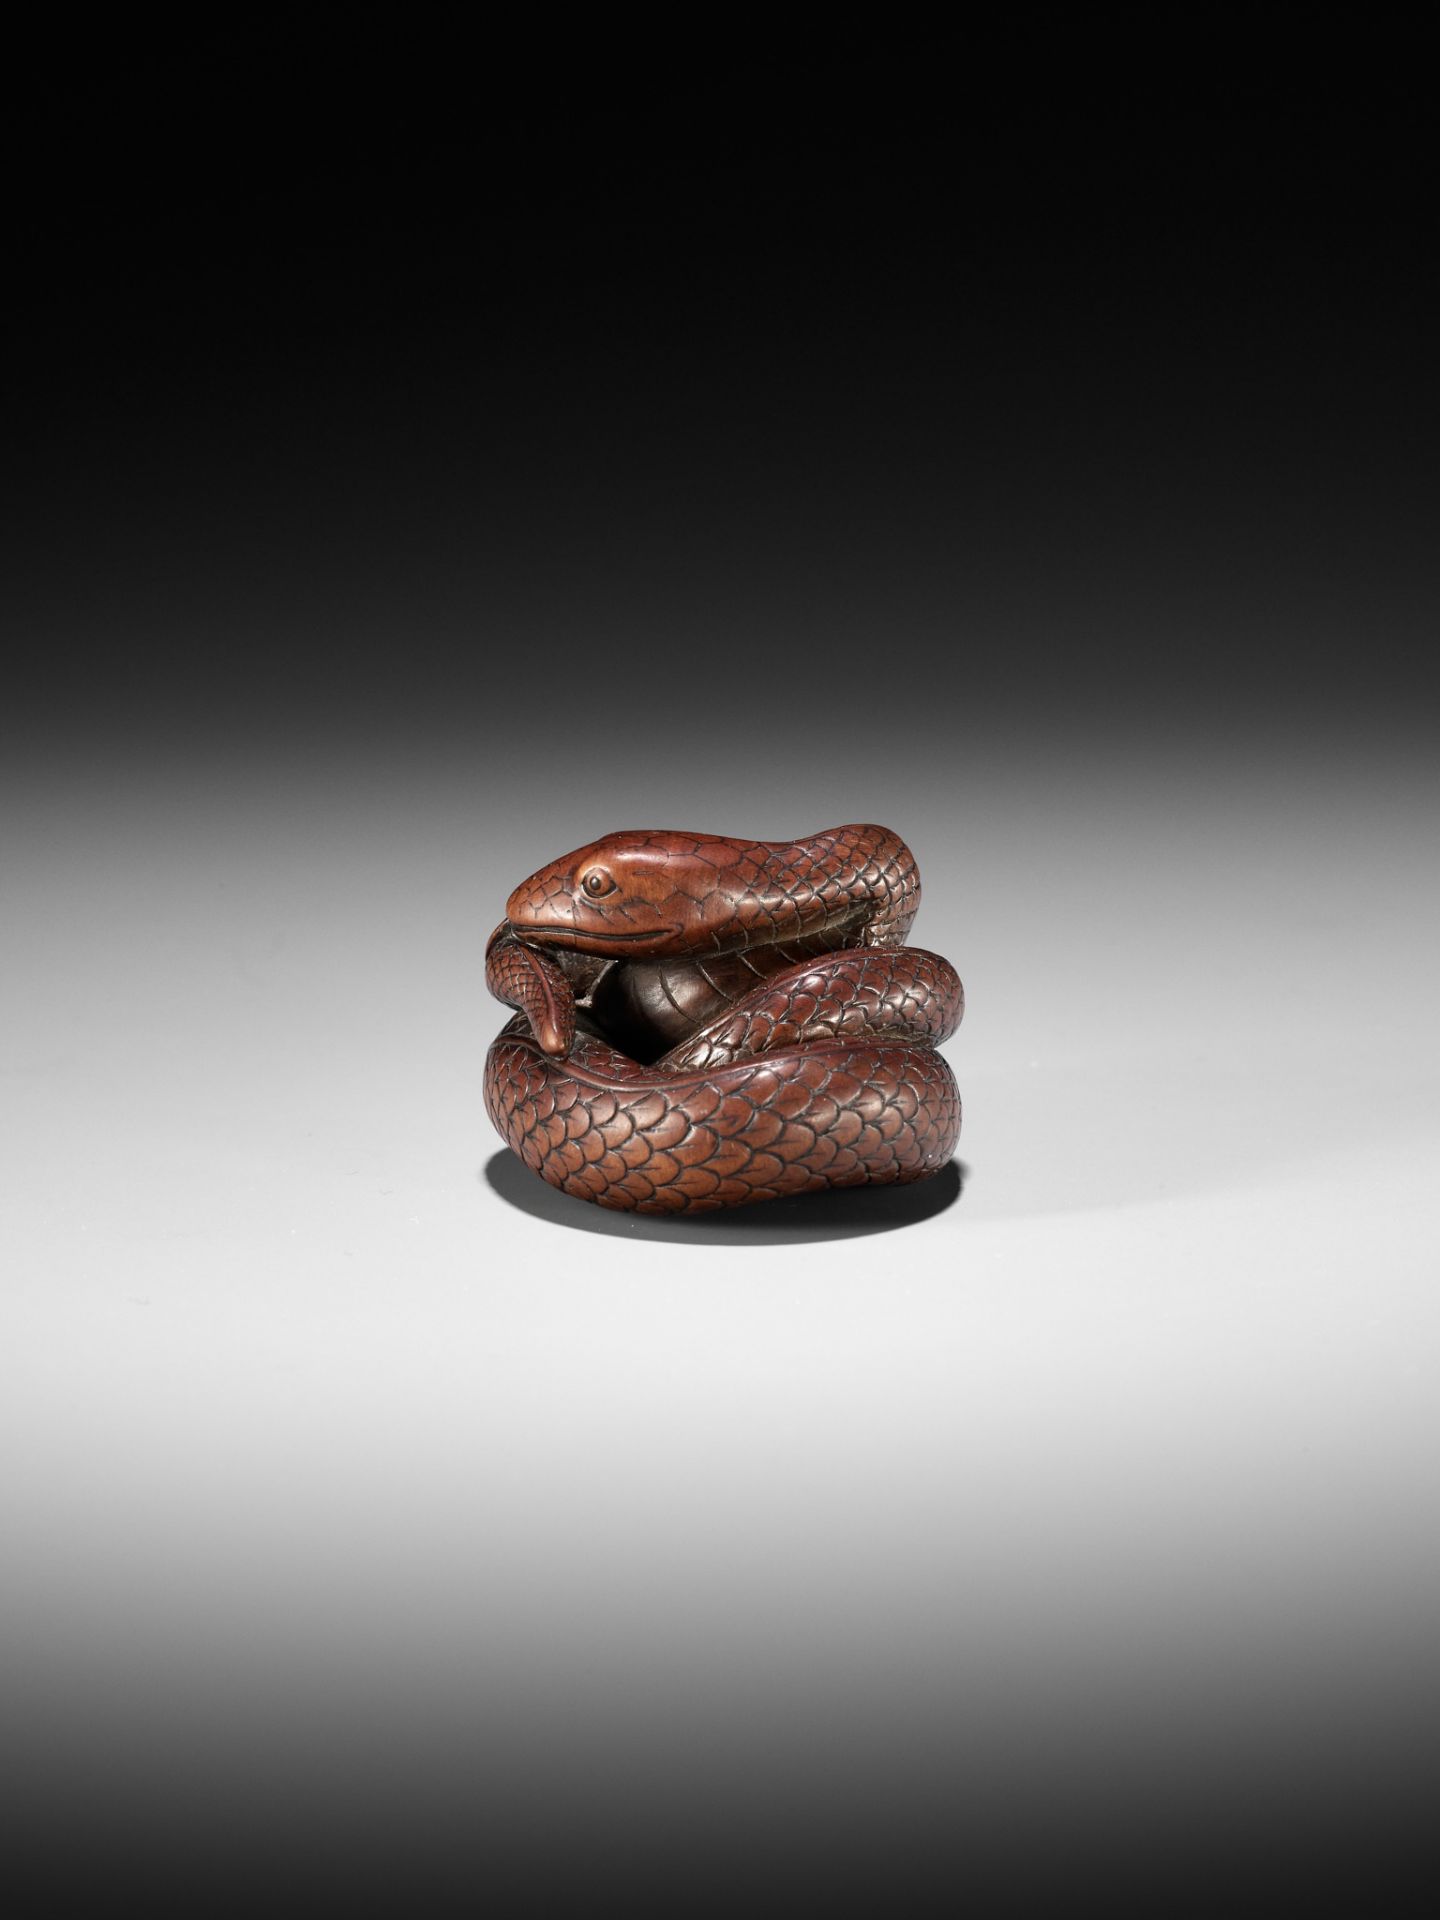 AN EXCEPTIONAL AND LARGE WOOD NETSUKE OF A SNAKE, ATTRIBUTED TO OKATOMO - Image 16 of 19